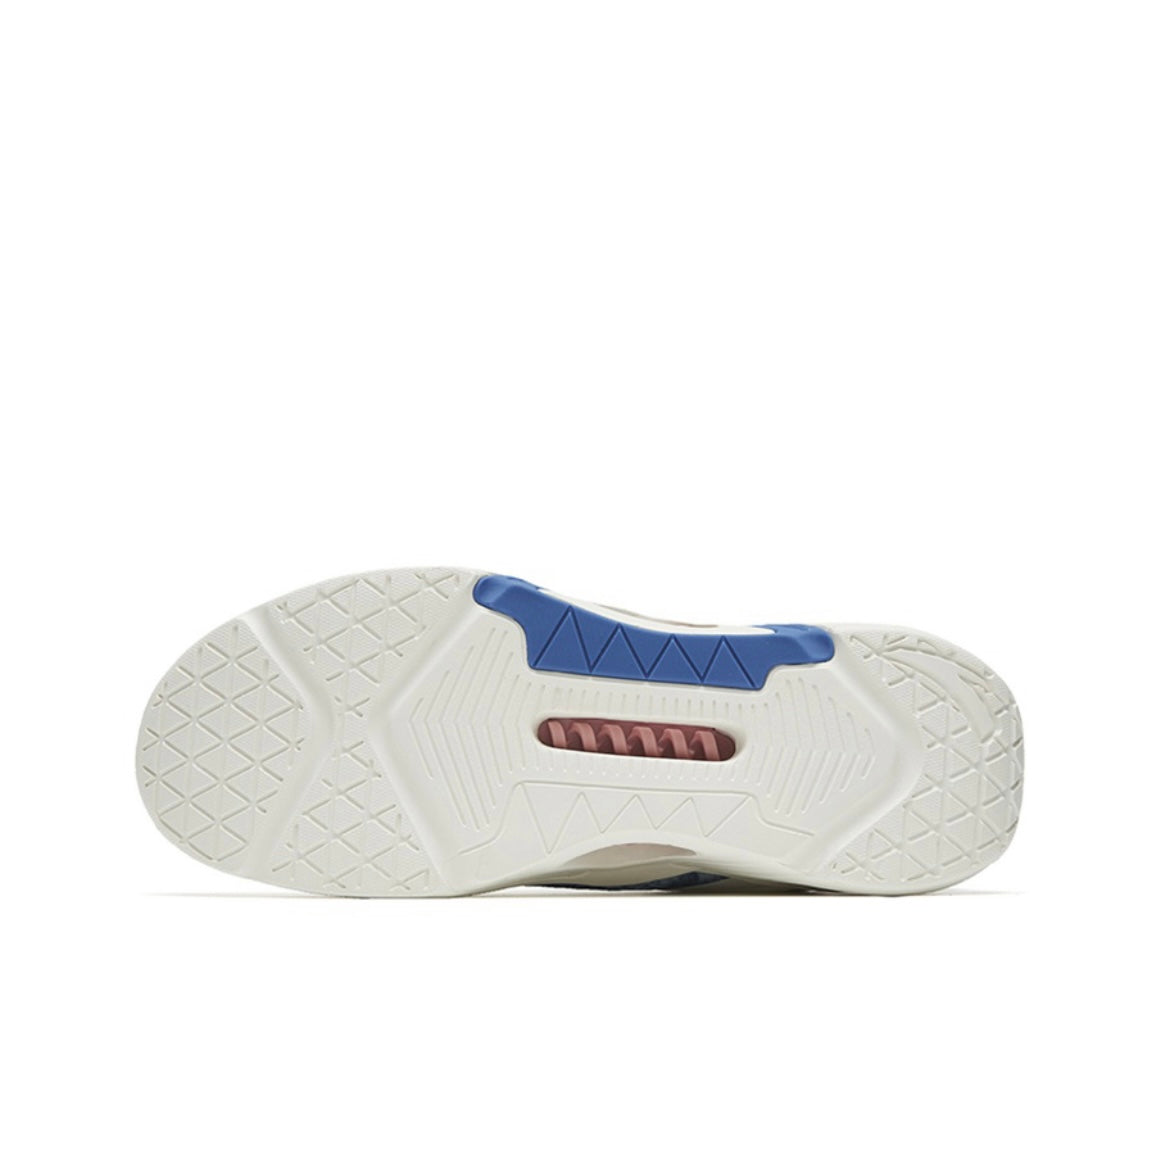 Anta Women National Team Training Weightlifting Shoes White/Blue